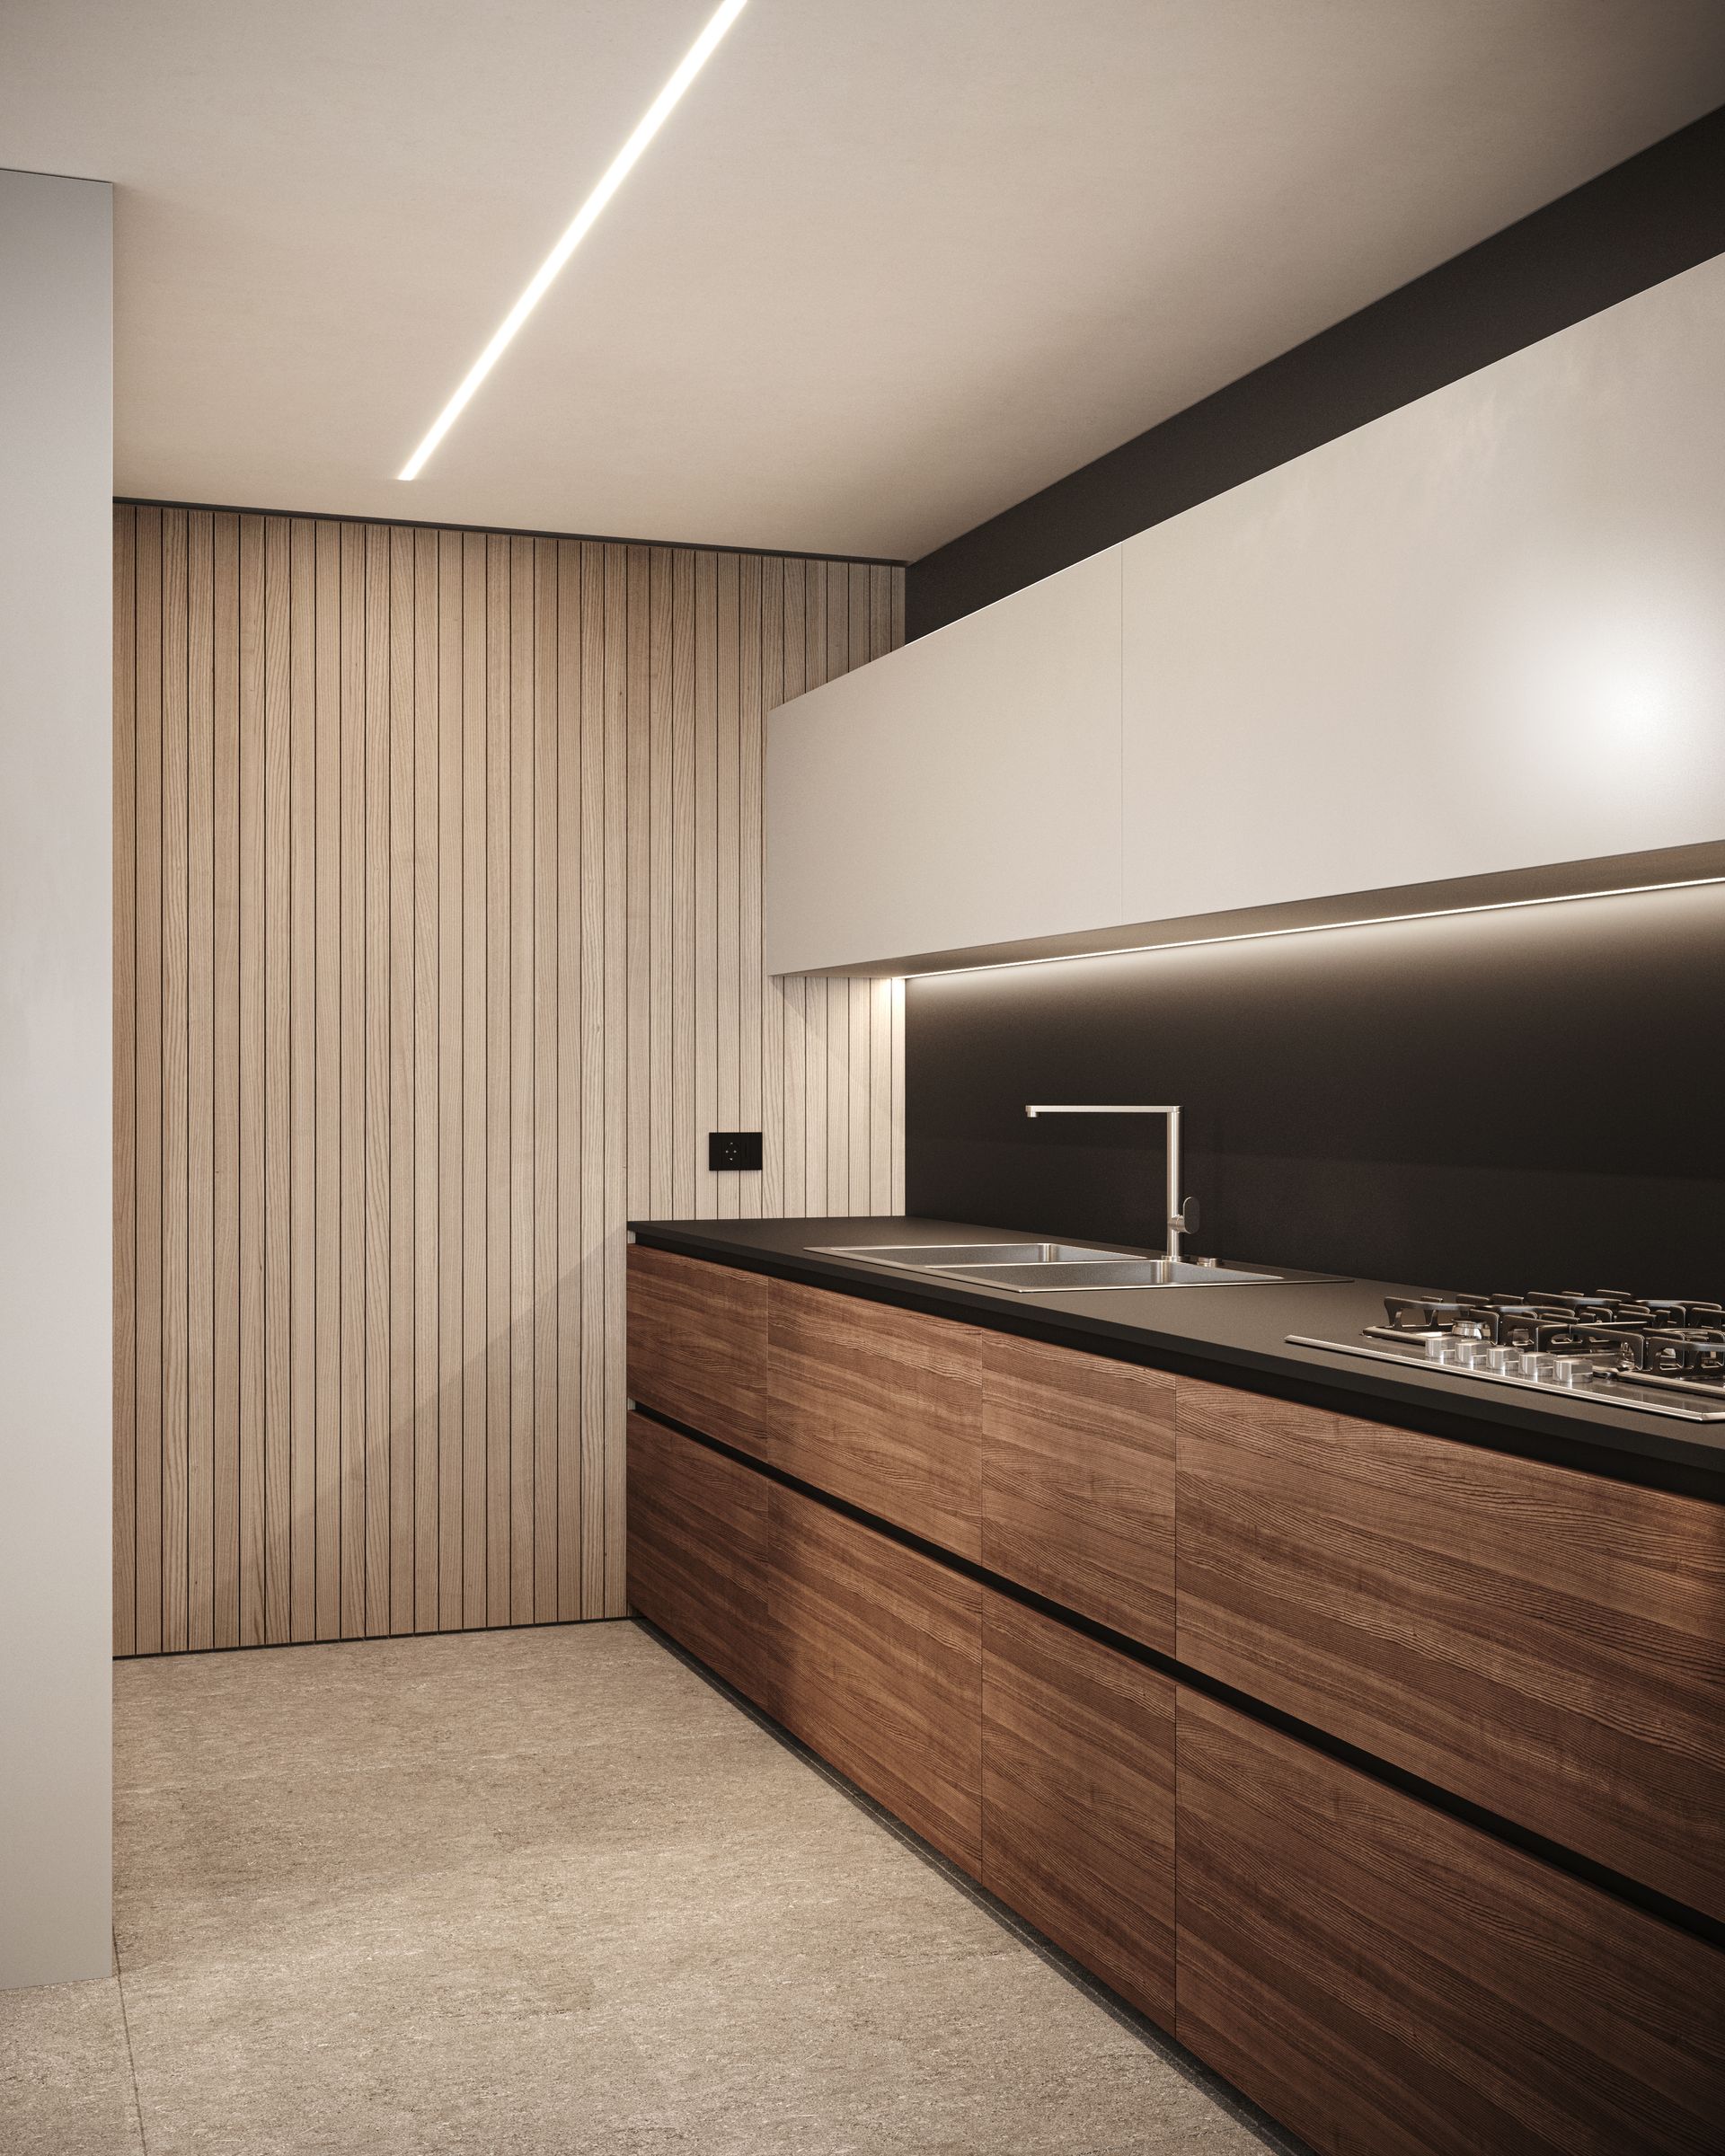 Interior design project, apartment renovation, tailor made kitchen, double-sided fireplace, Bergamo, Milan, Brescia, Como, London, New York, Paris, Gstaad. Officina Magisafi architecture design - cooking area rendering